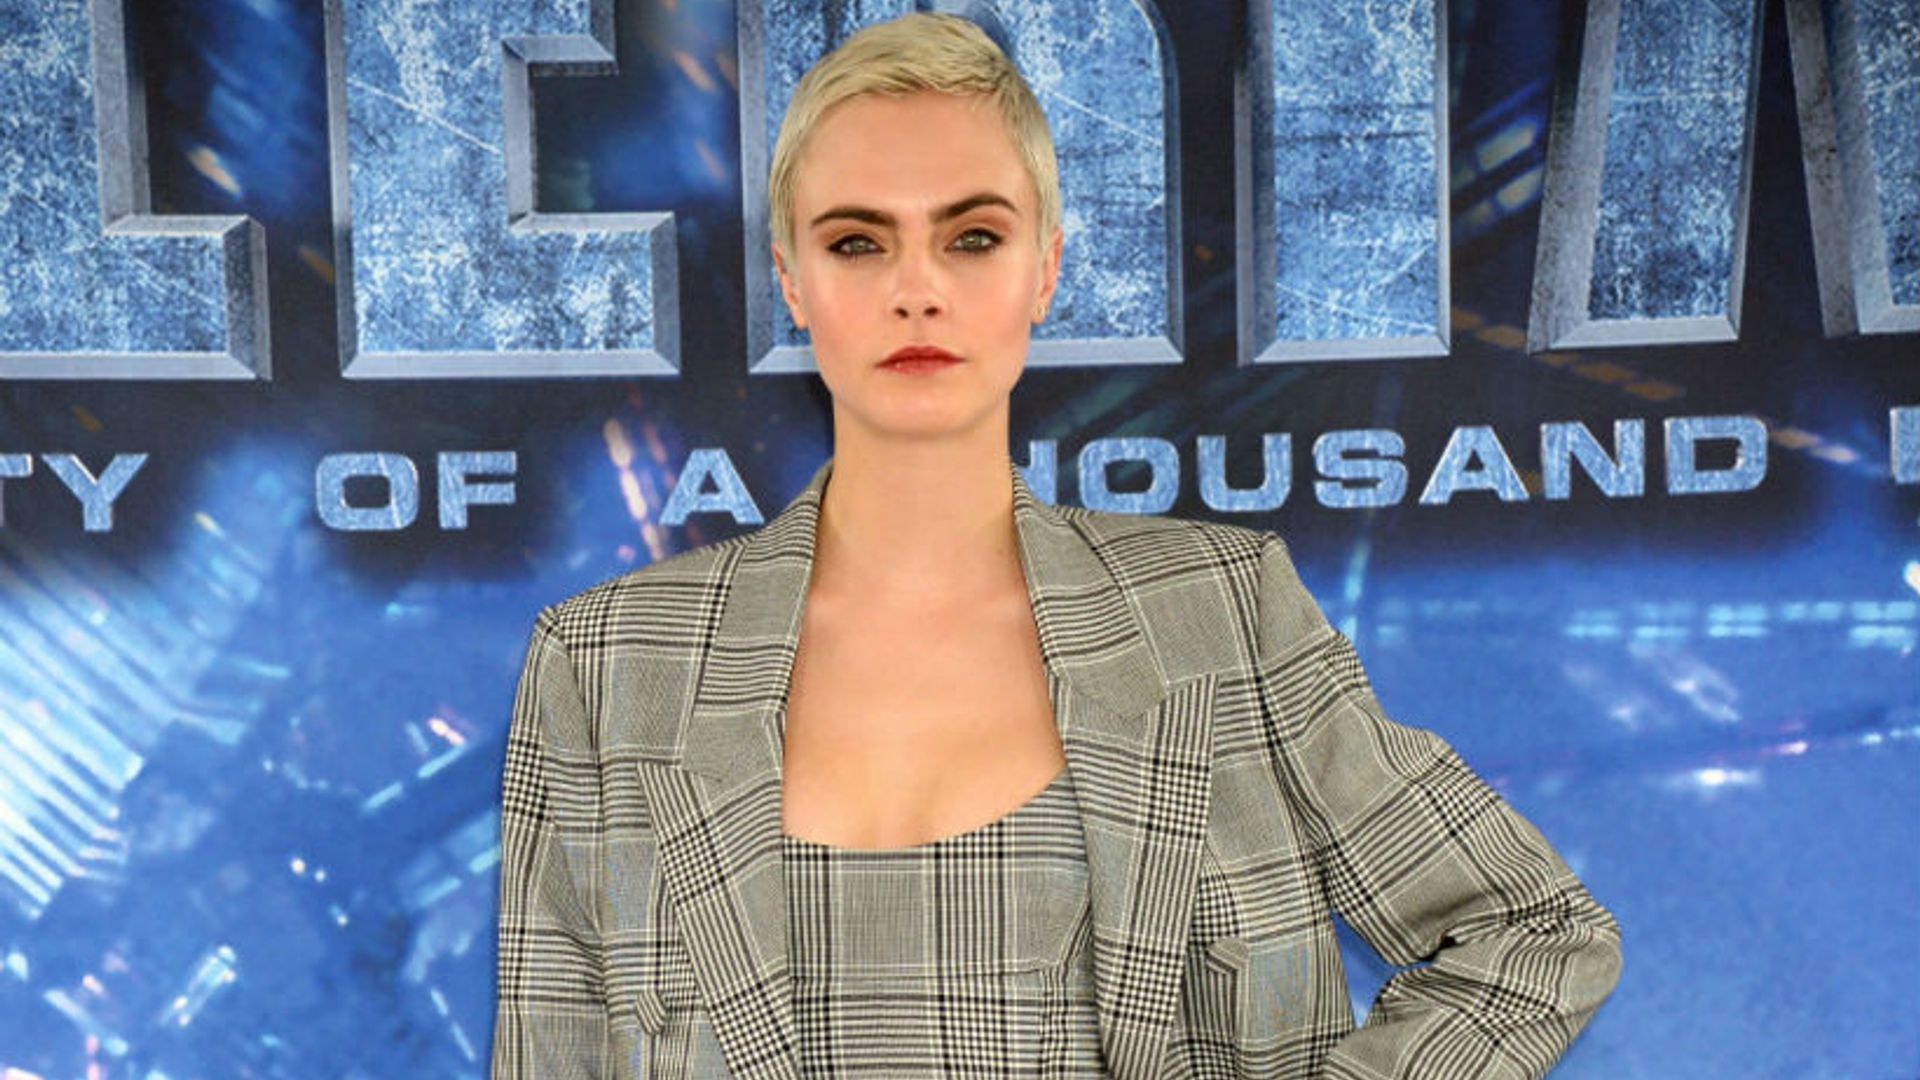 Cara Delevingne wears Alexander Wang suit to Valerian photo call